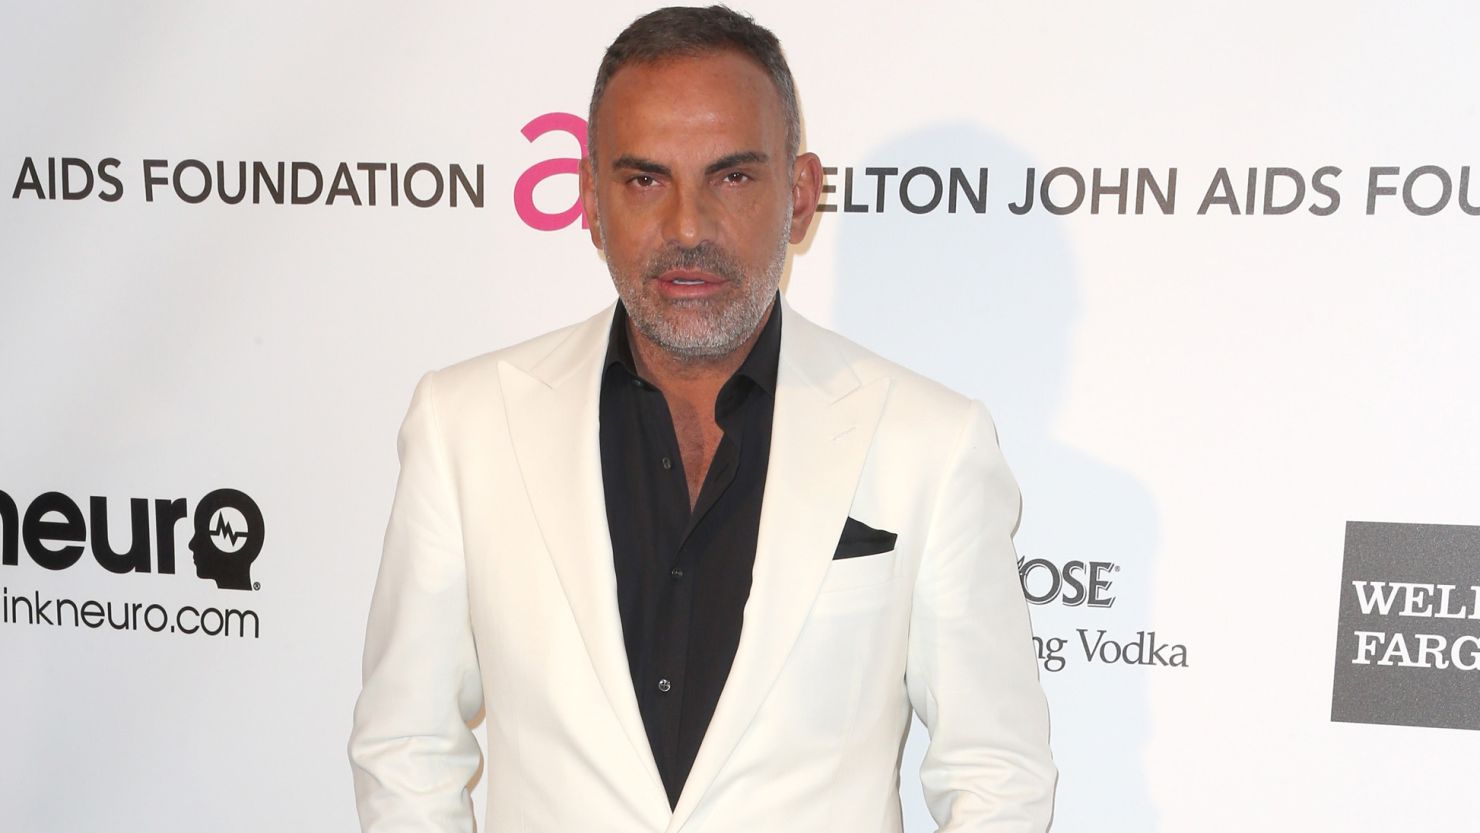 Fashion designer Christian Audigier died in Los Angeles at the age of 57.